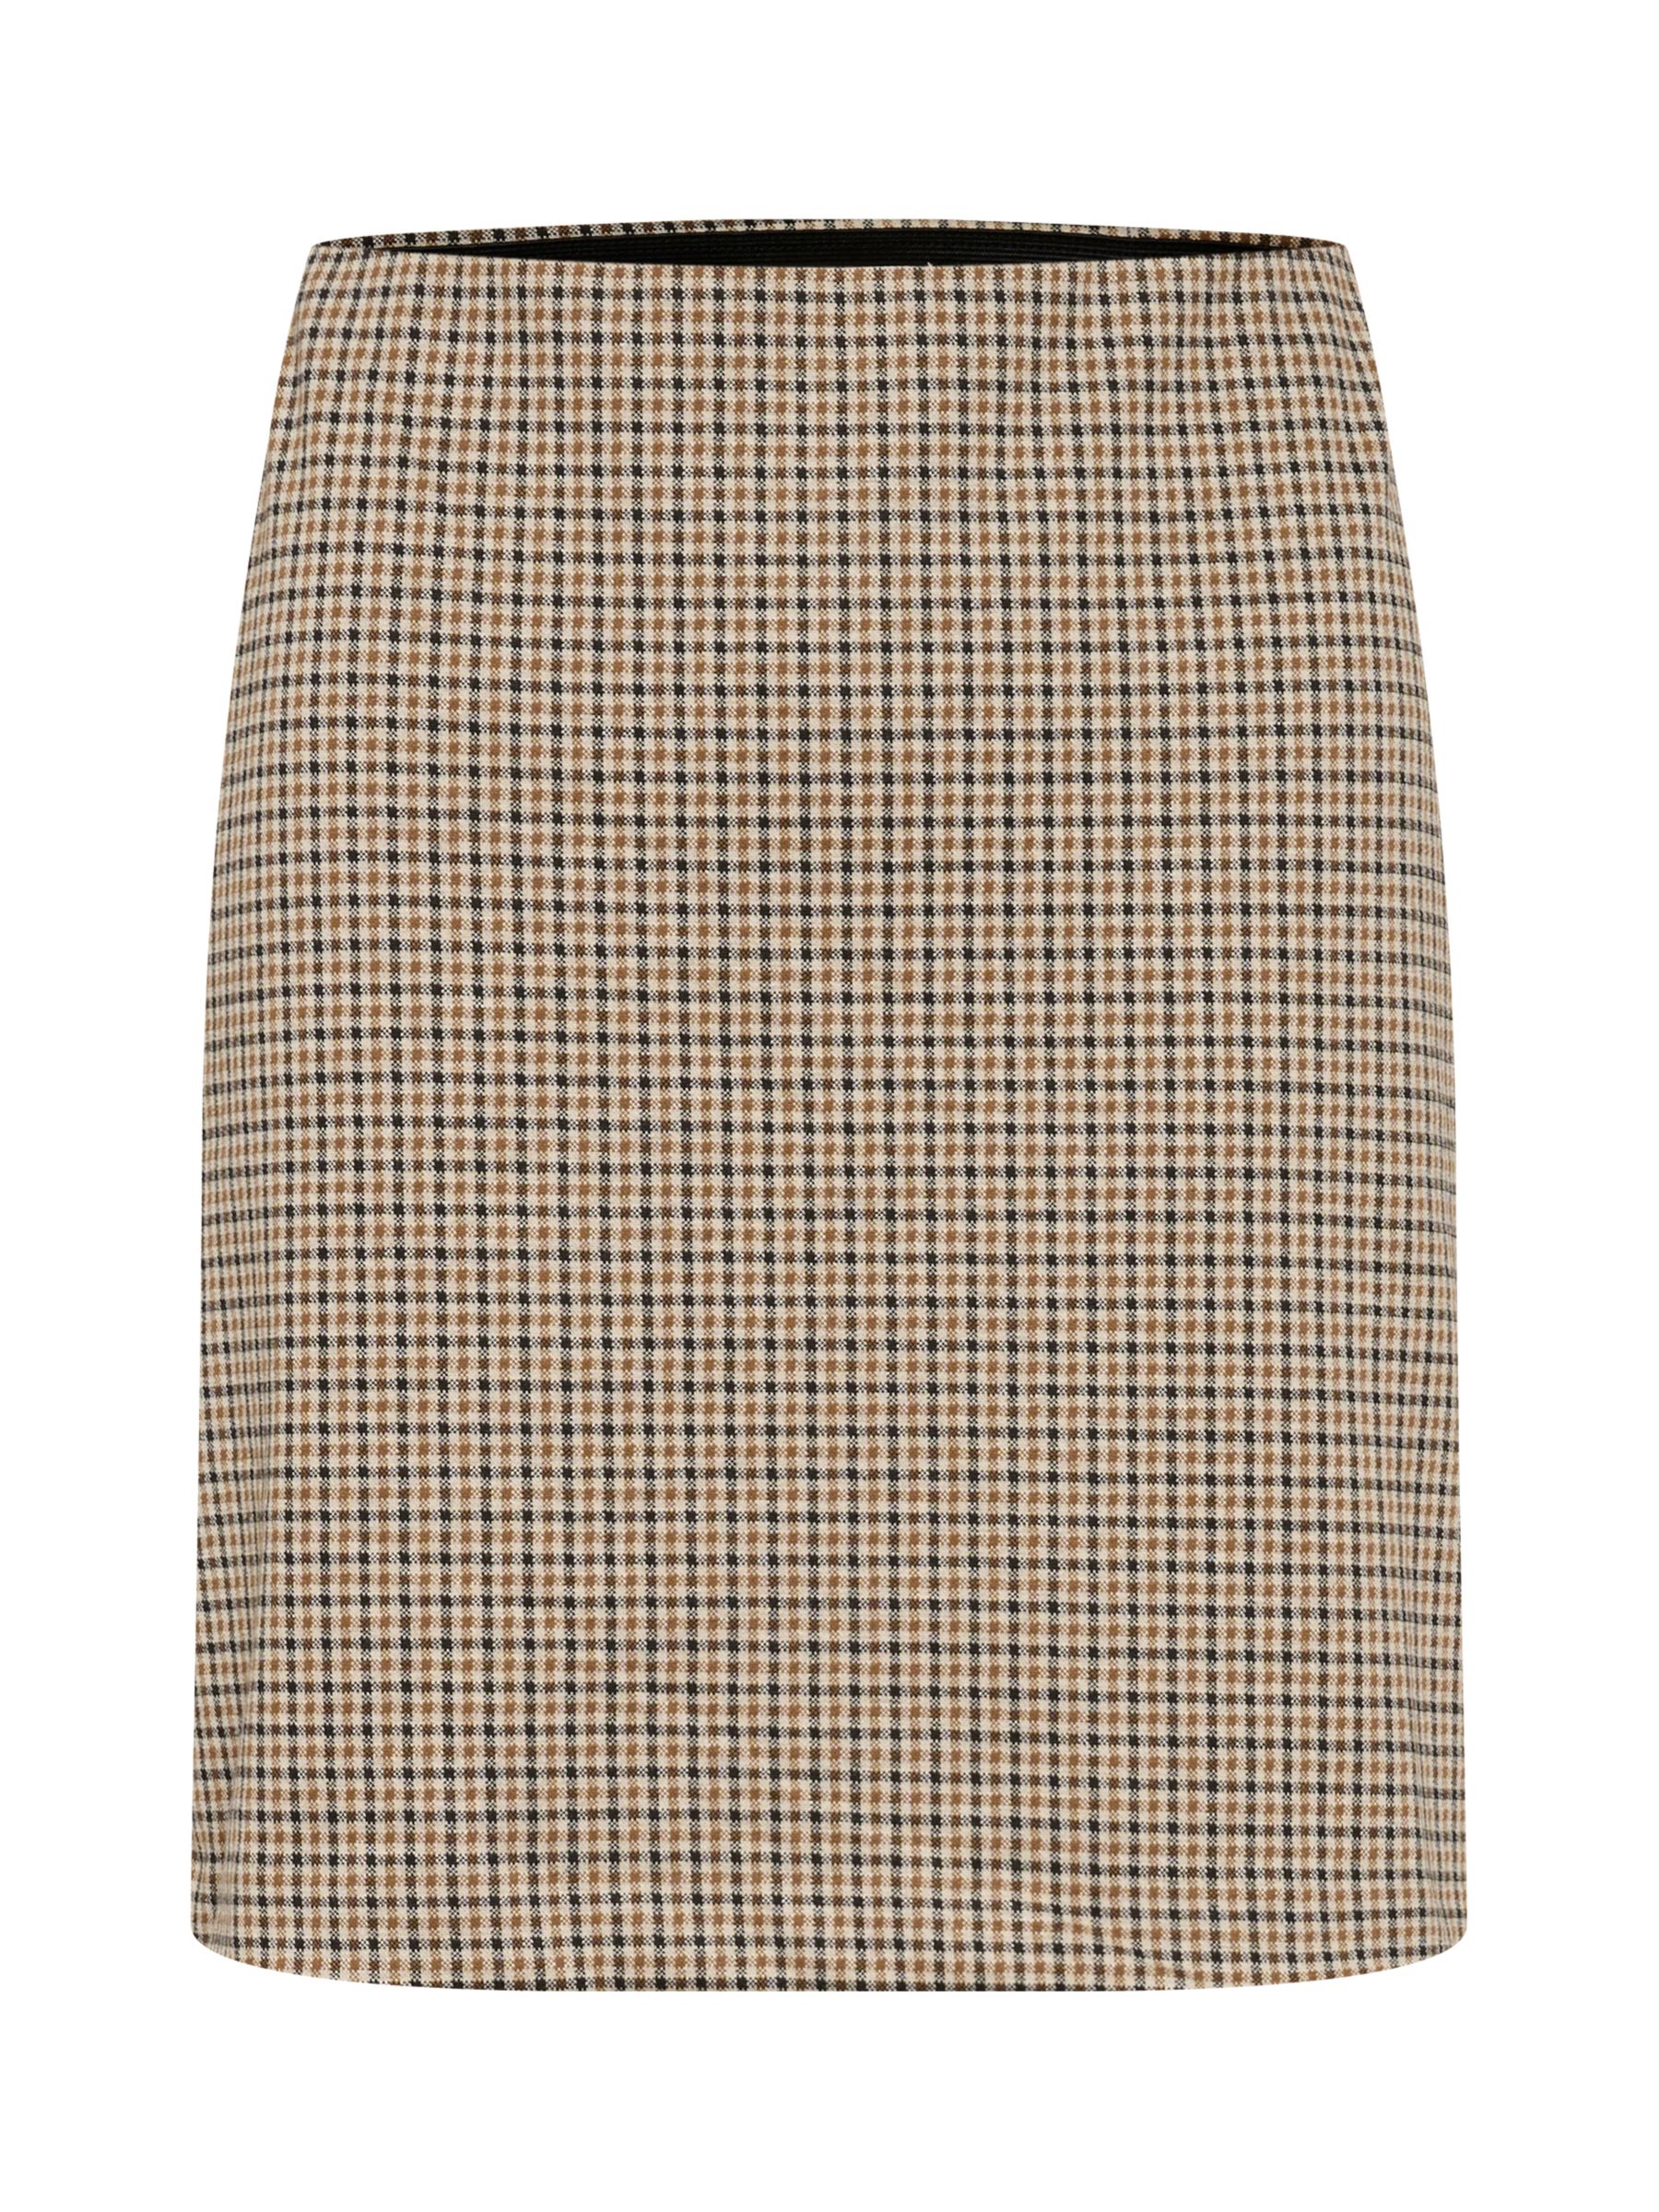 Buy Part Two Corinne Mini Skirt, Toasted Coco Check Online at johnlewis.com